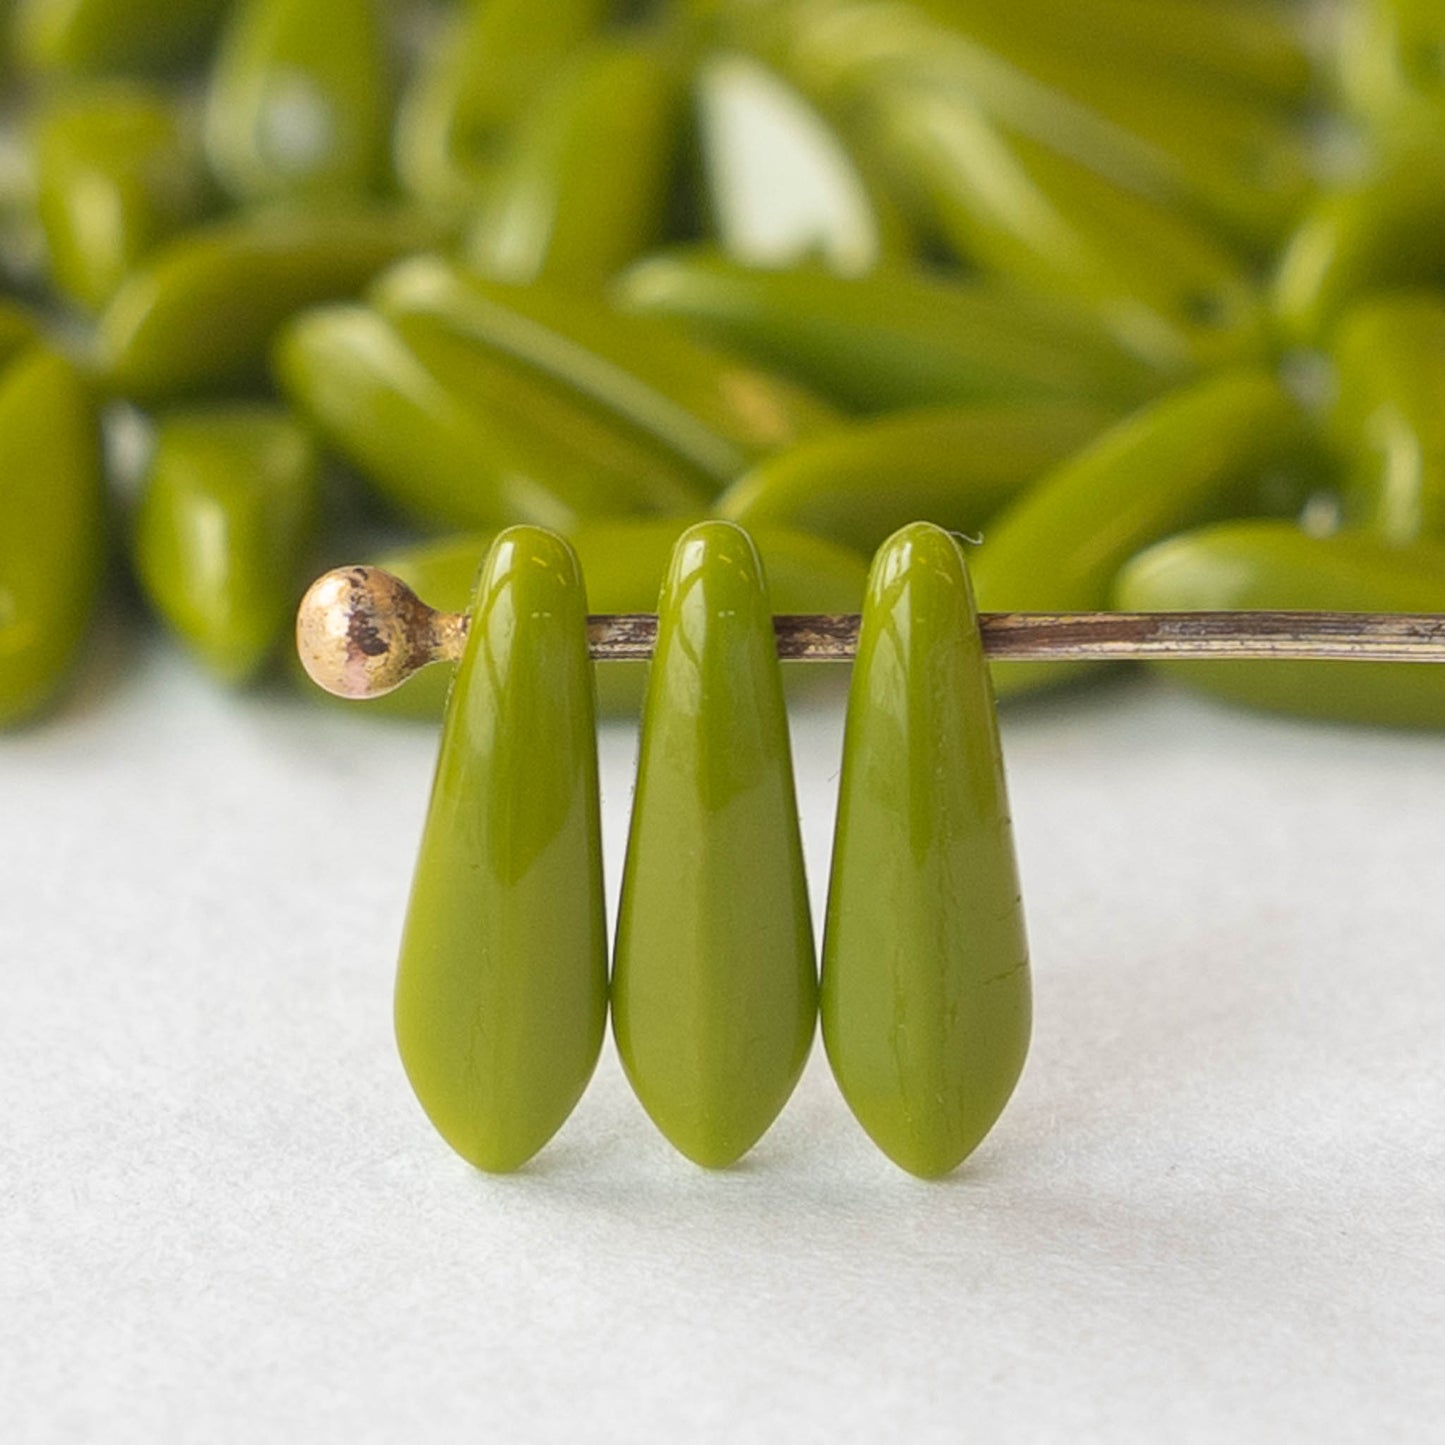 11mm Dagger Beads - Opaque Olive Green - 50 beads